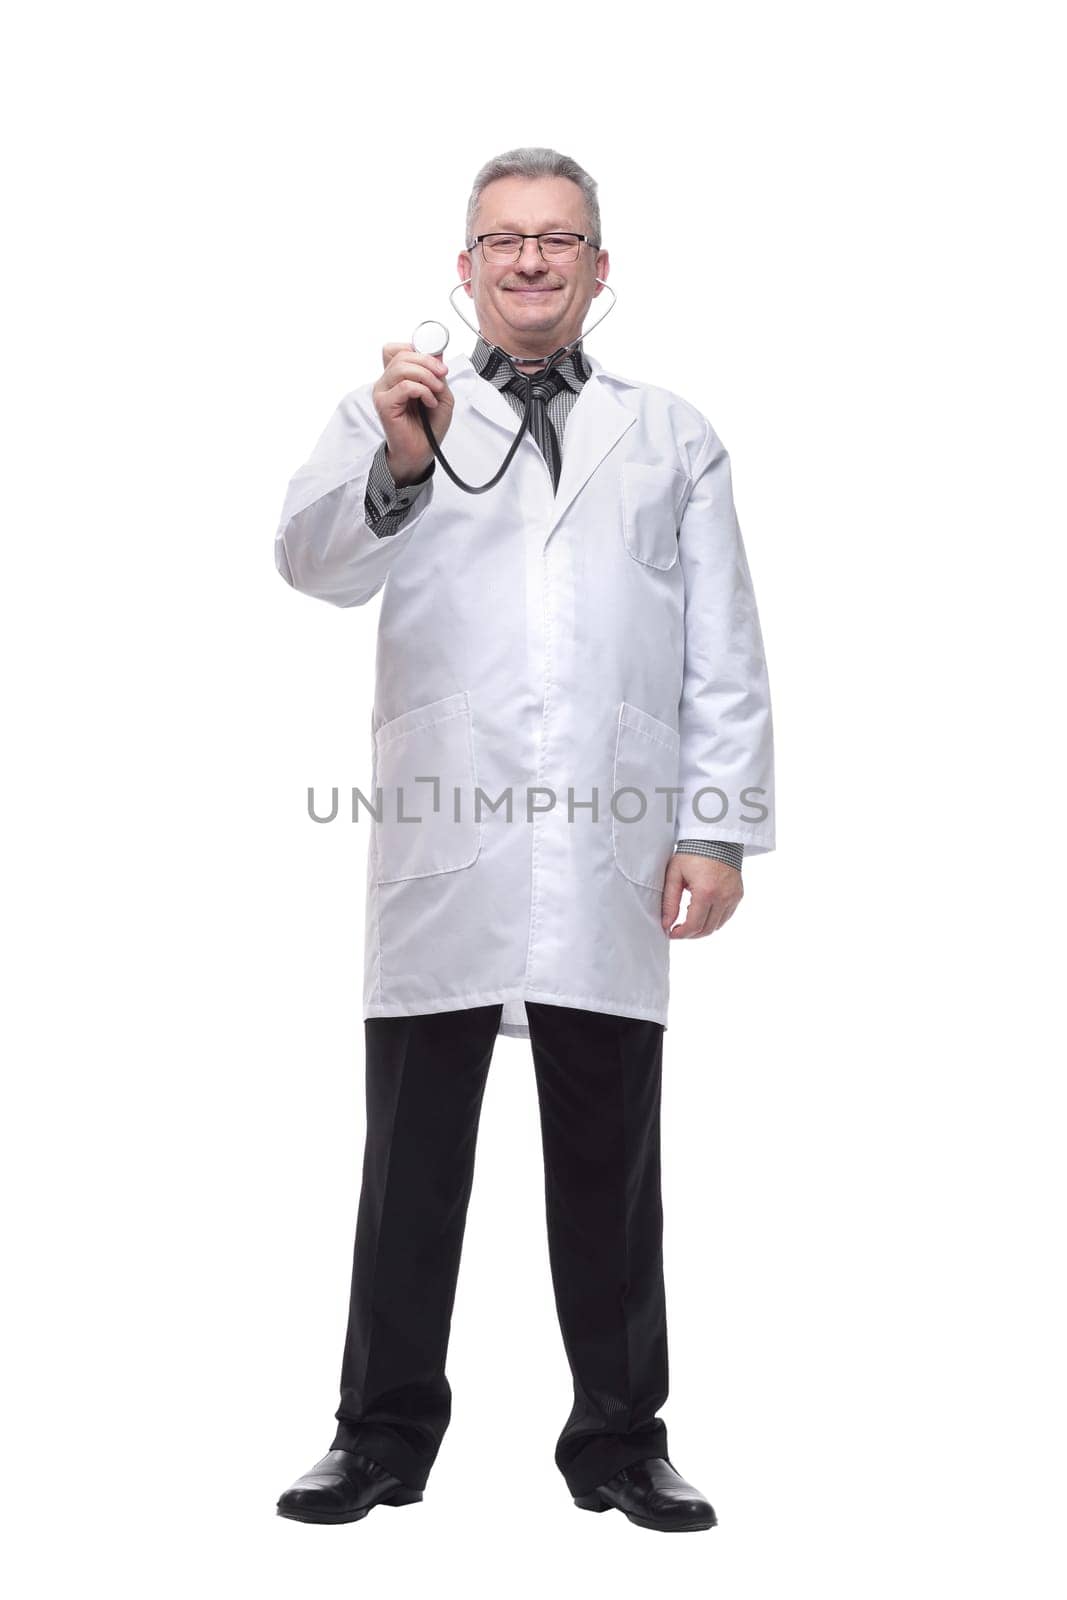 Smiling medical doctor with stethoscope. Isolated over white background by asdf